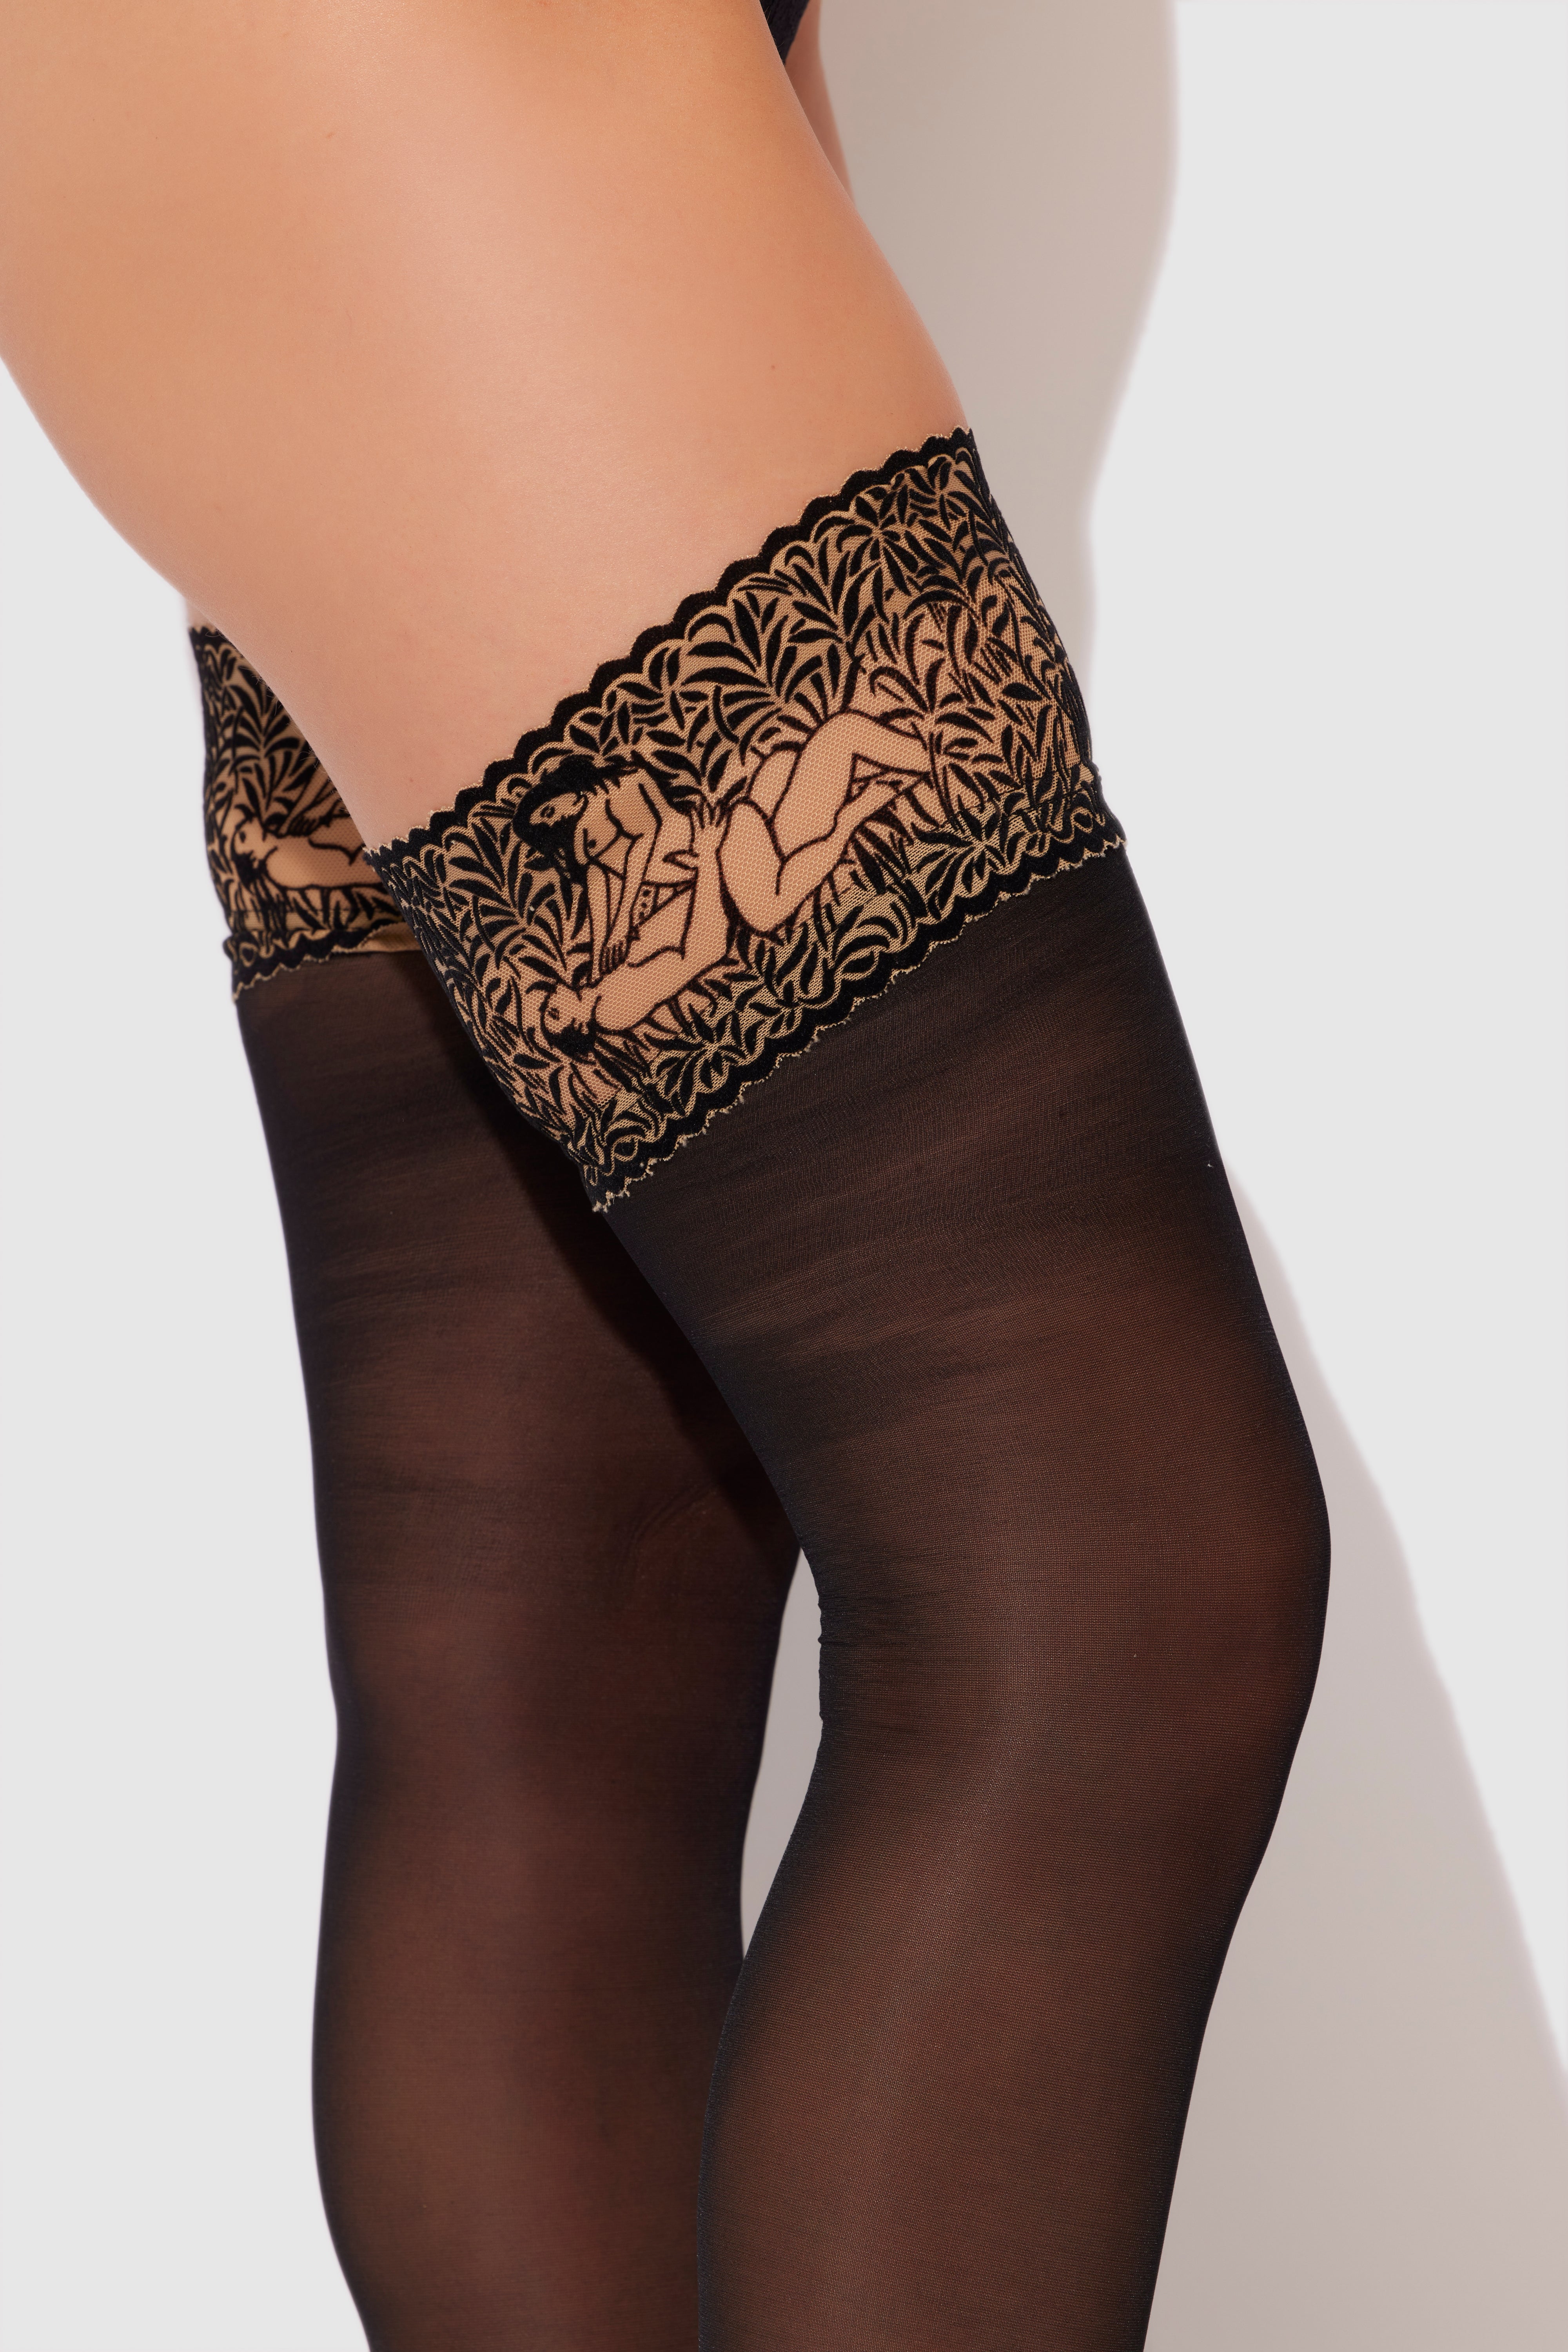 Sexual &amp; Sheer Stay Up Thigh Highs - Black Light